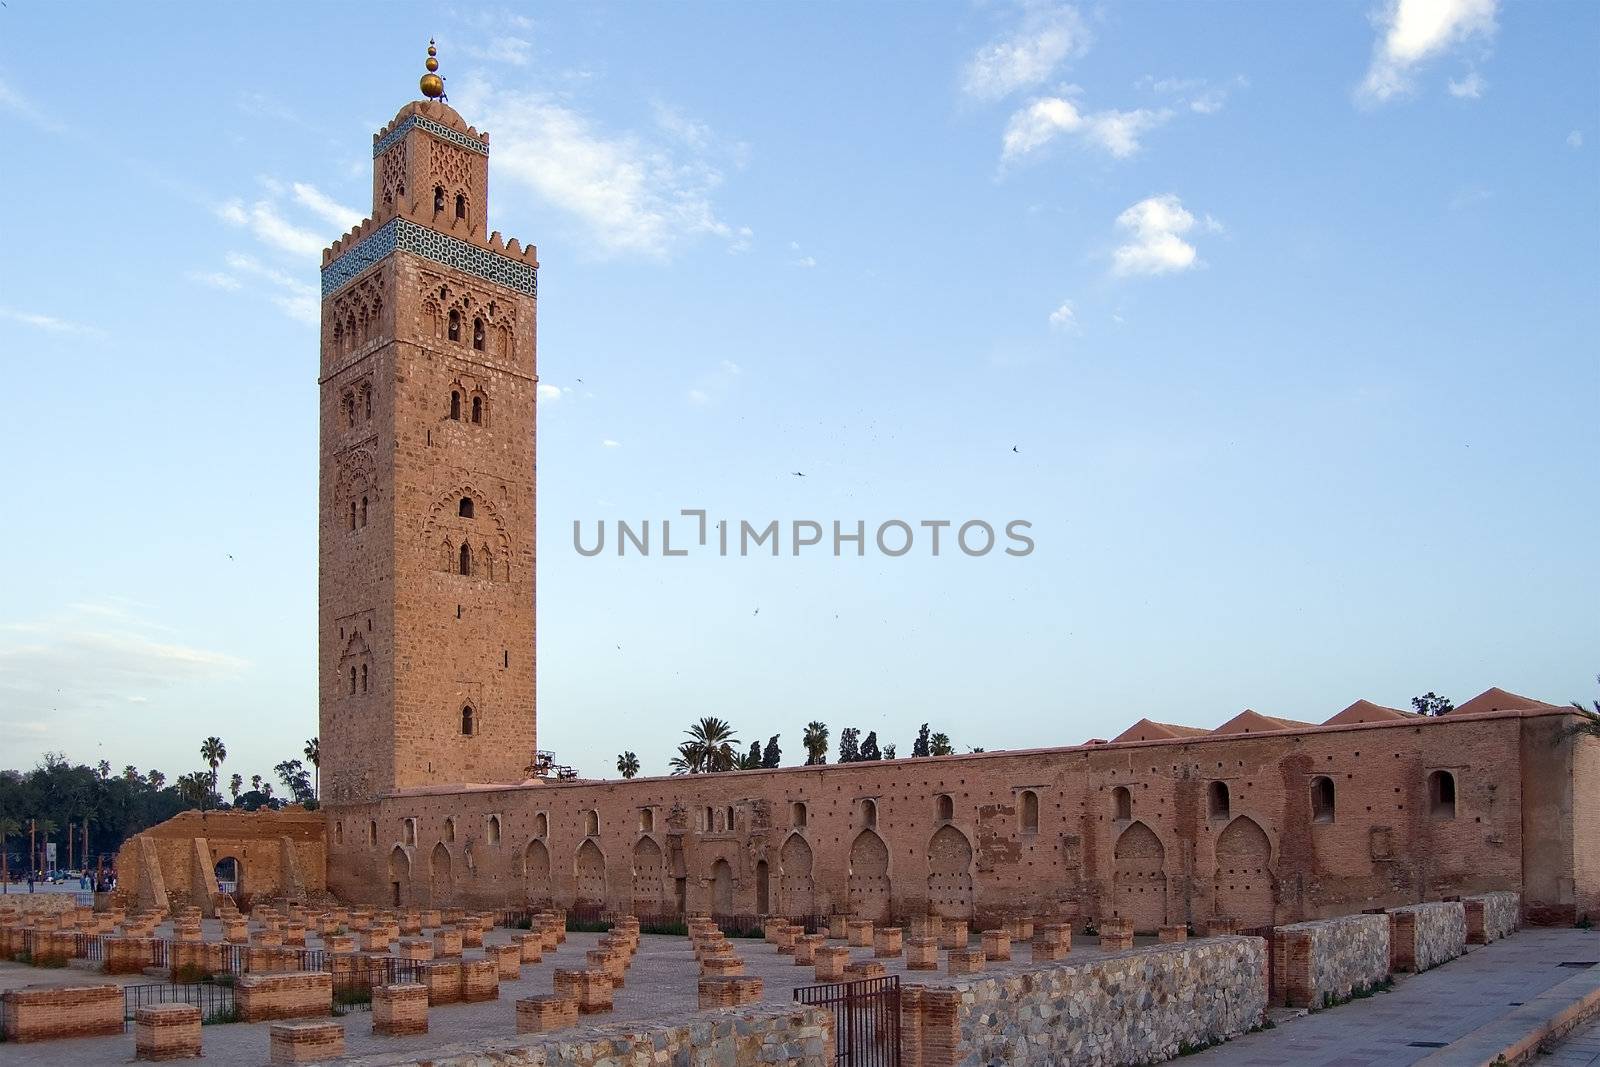 Koutoubia Minaret and the Mosque in the Marrakesh center, Morocco